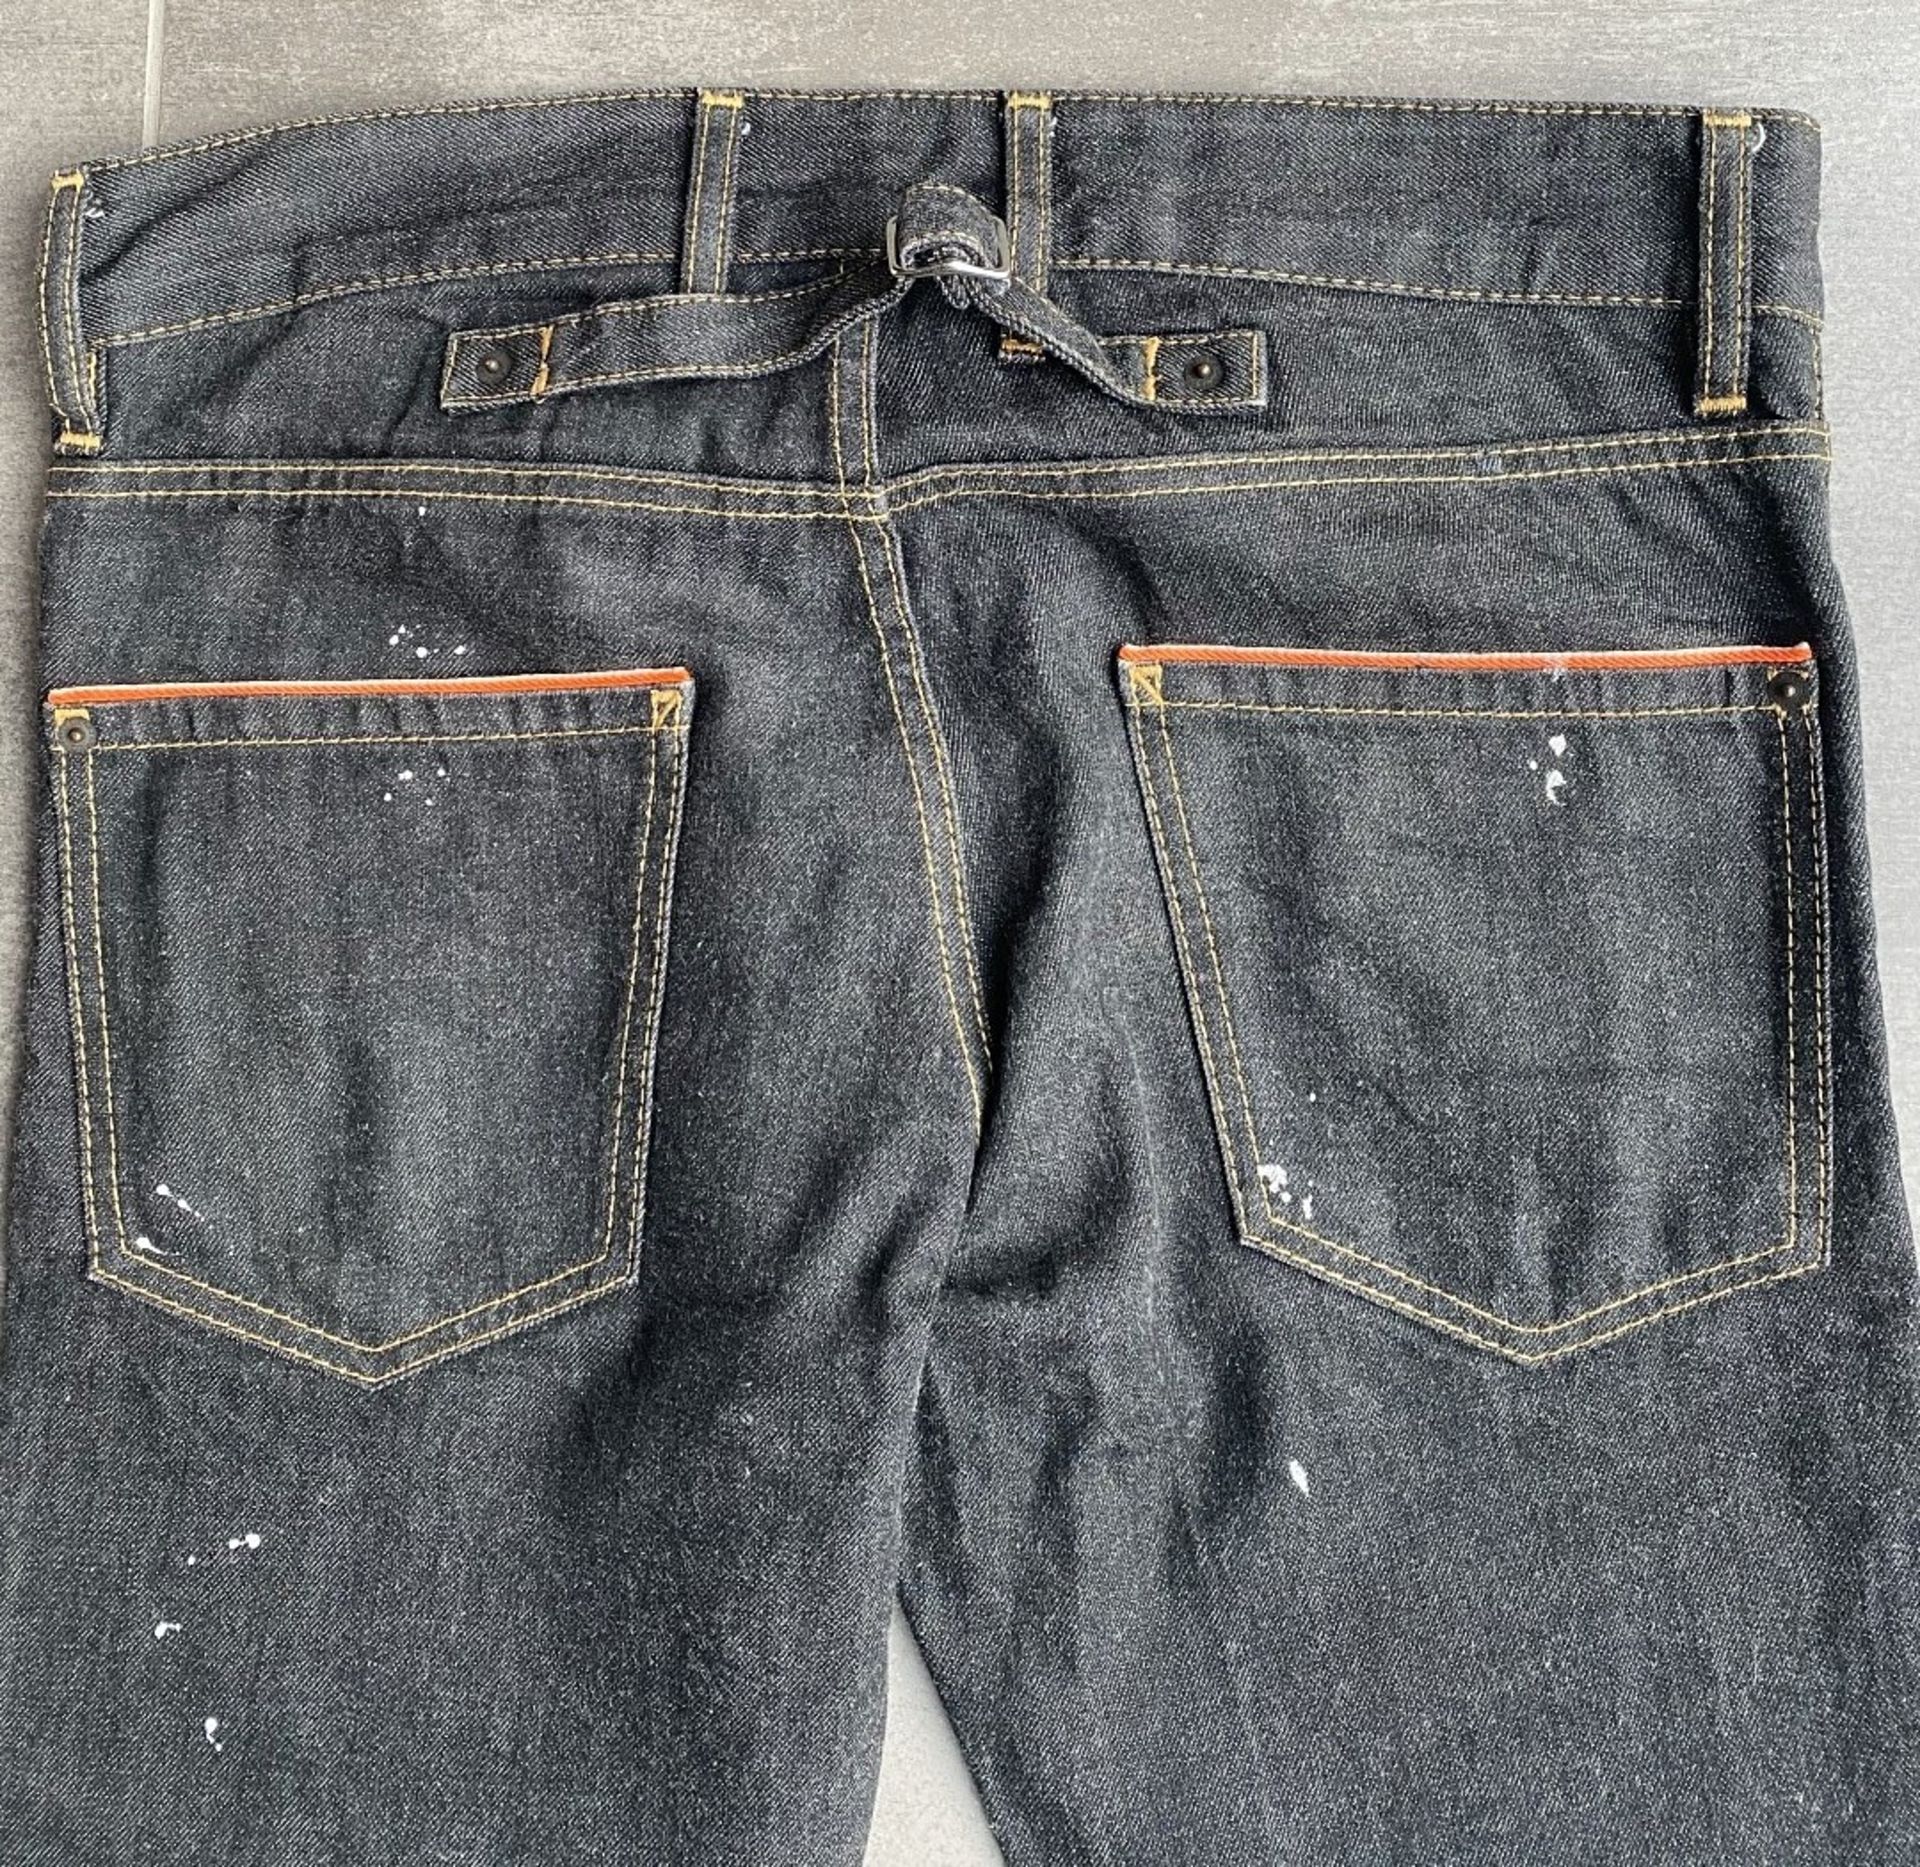 1 x Pair Of Men's Genuine Dsquared2 Distressed-style Designer Jeans In Black - Size: UK 30 - Image 3 of 7